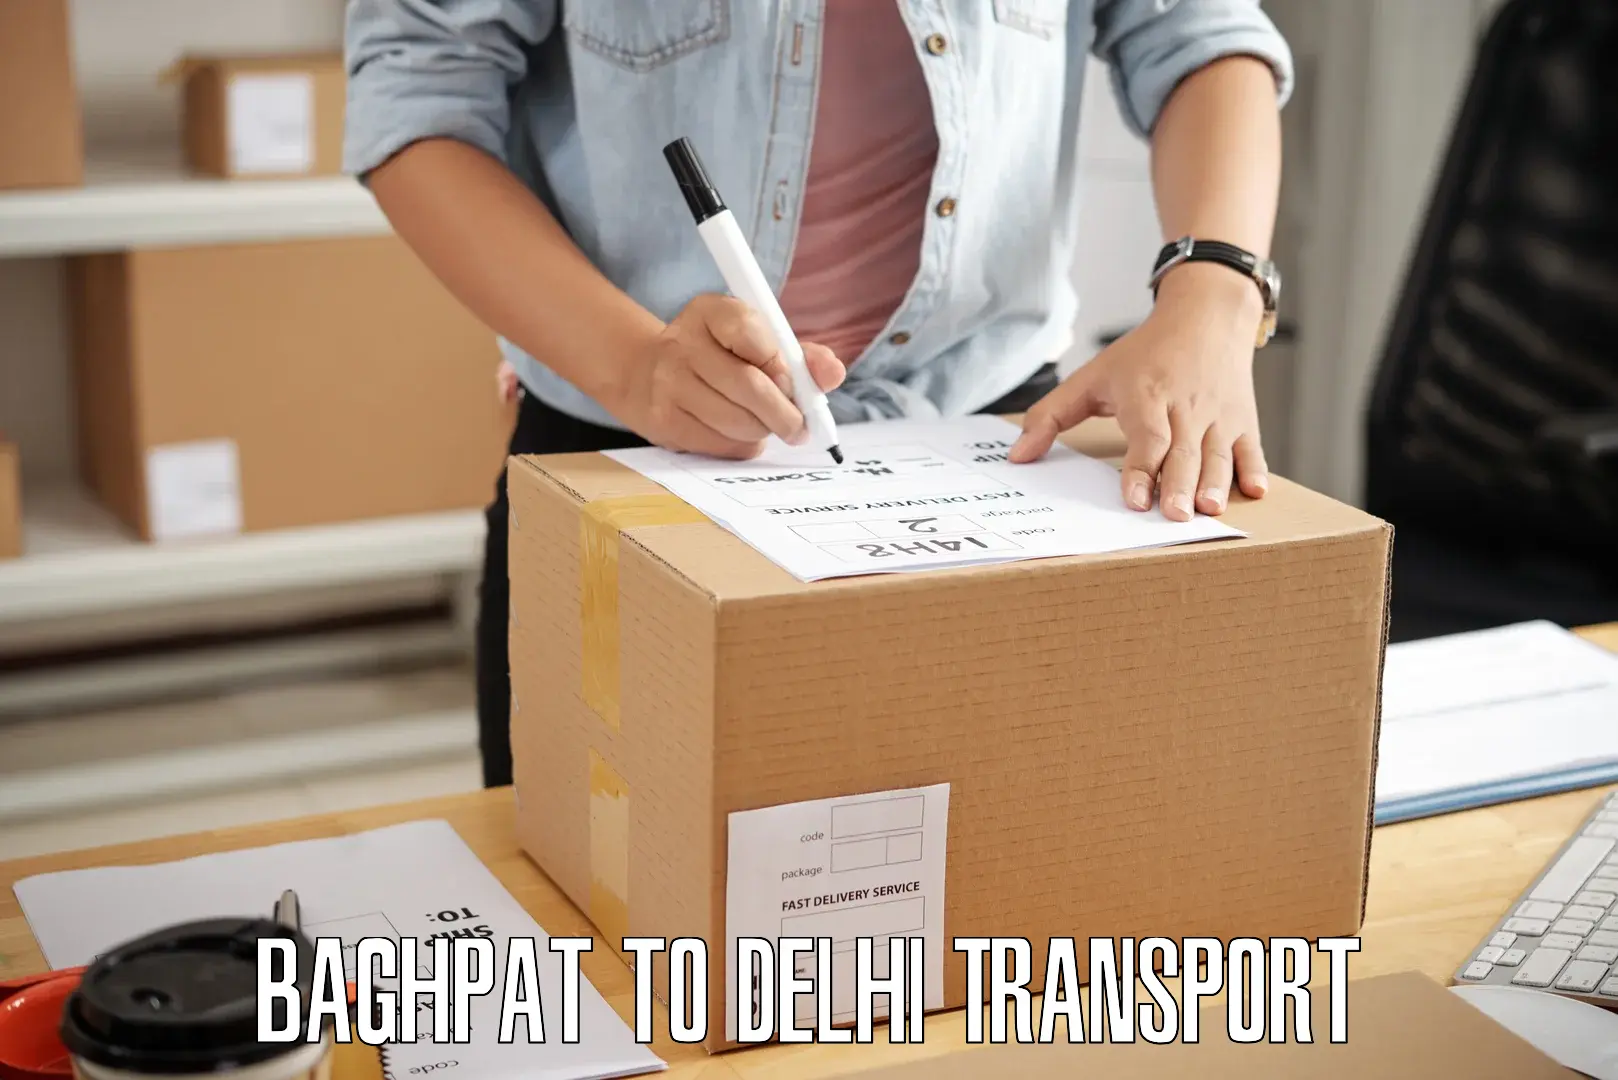 Lorry transport service Baghpat to Delhi